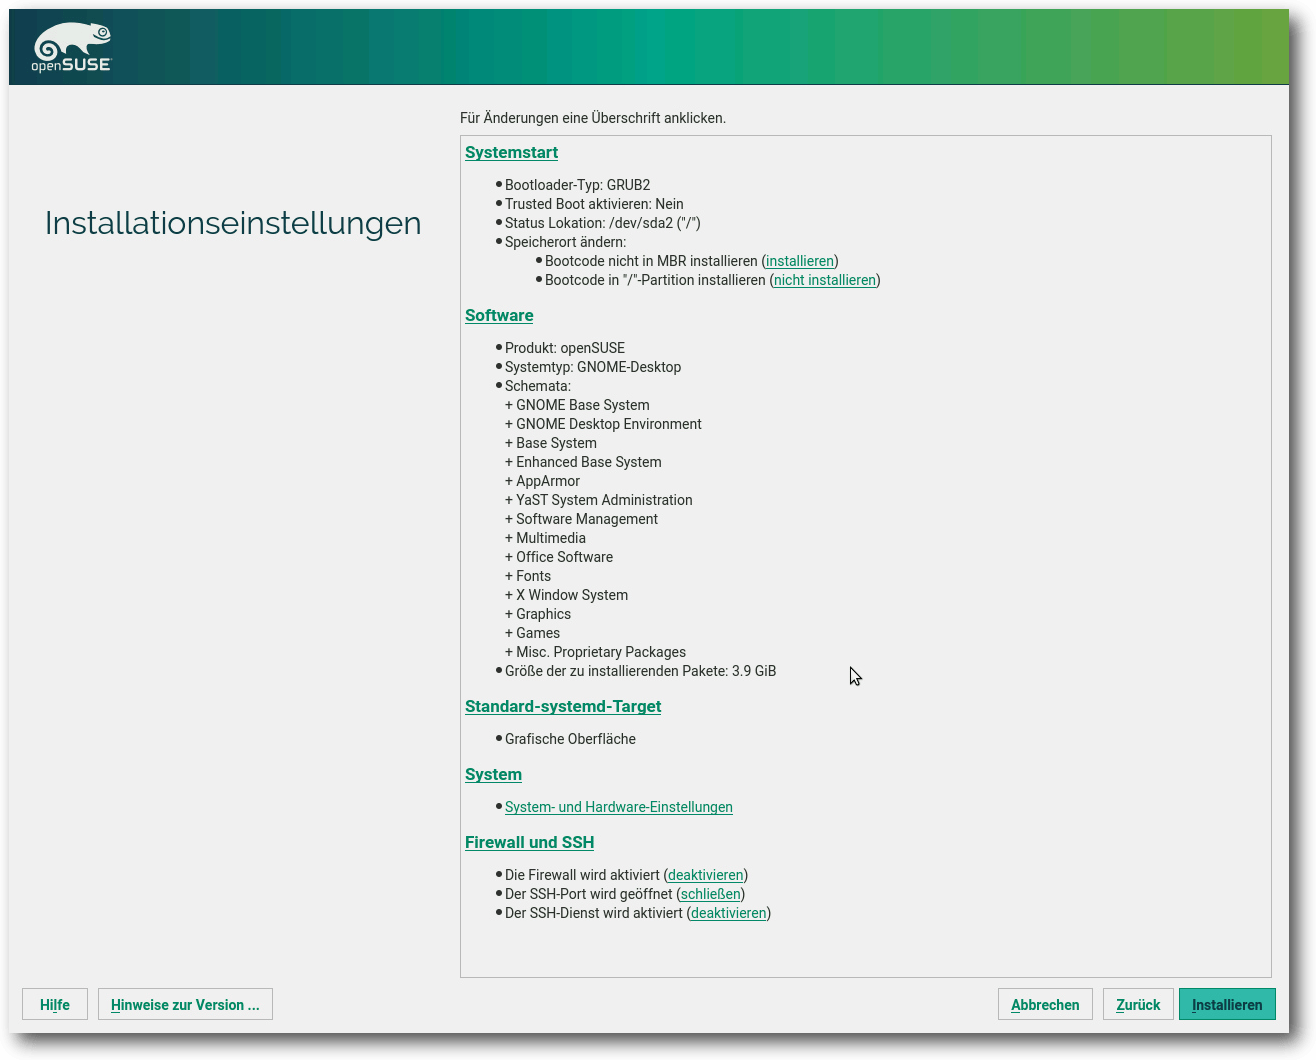 opensuse422_installation2.png